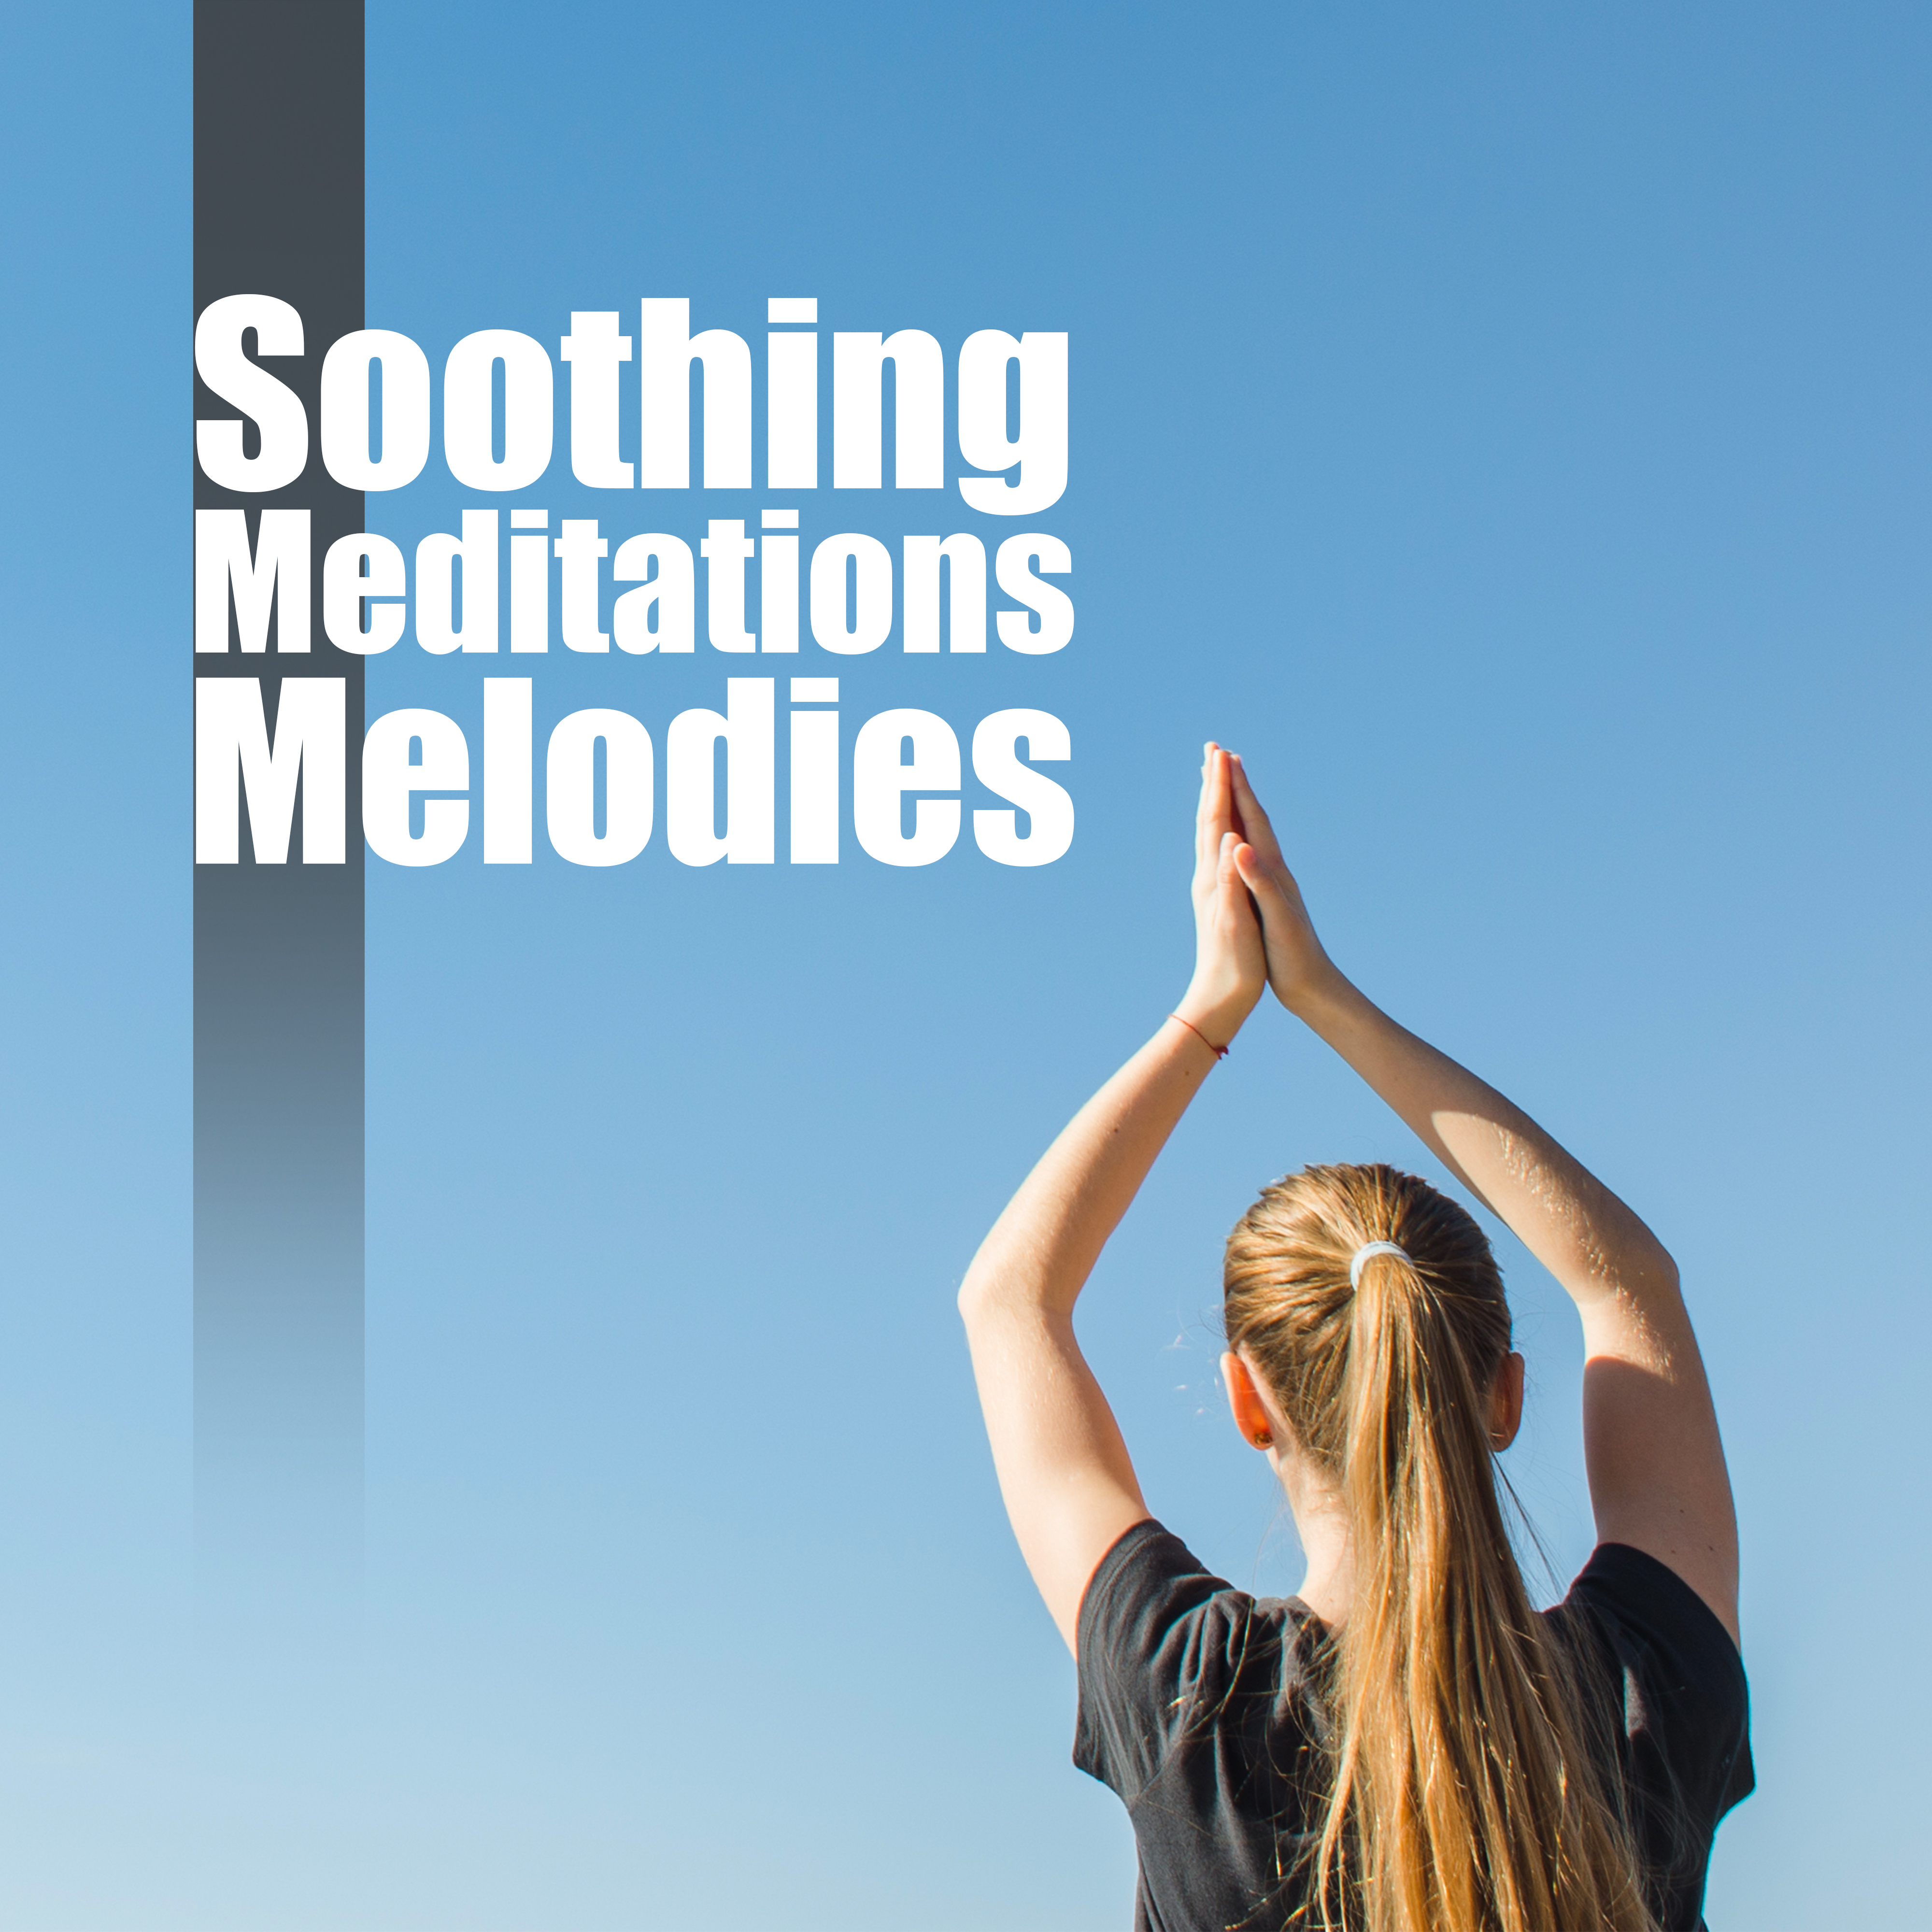 Soothing Meditation Melodies